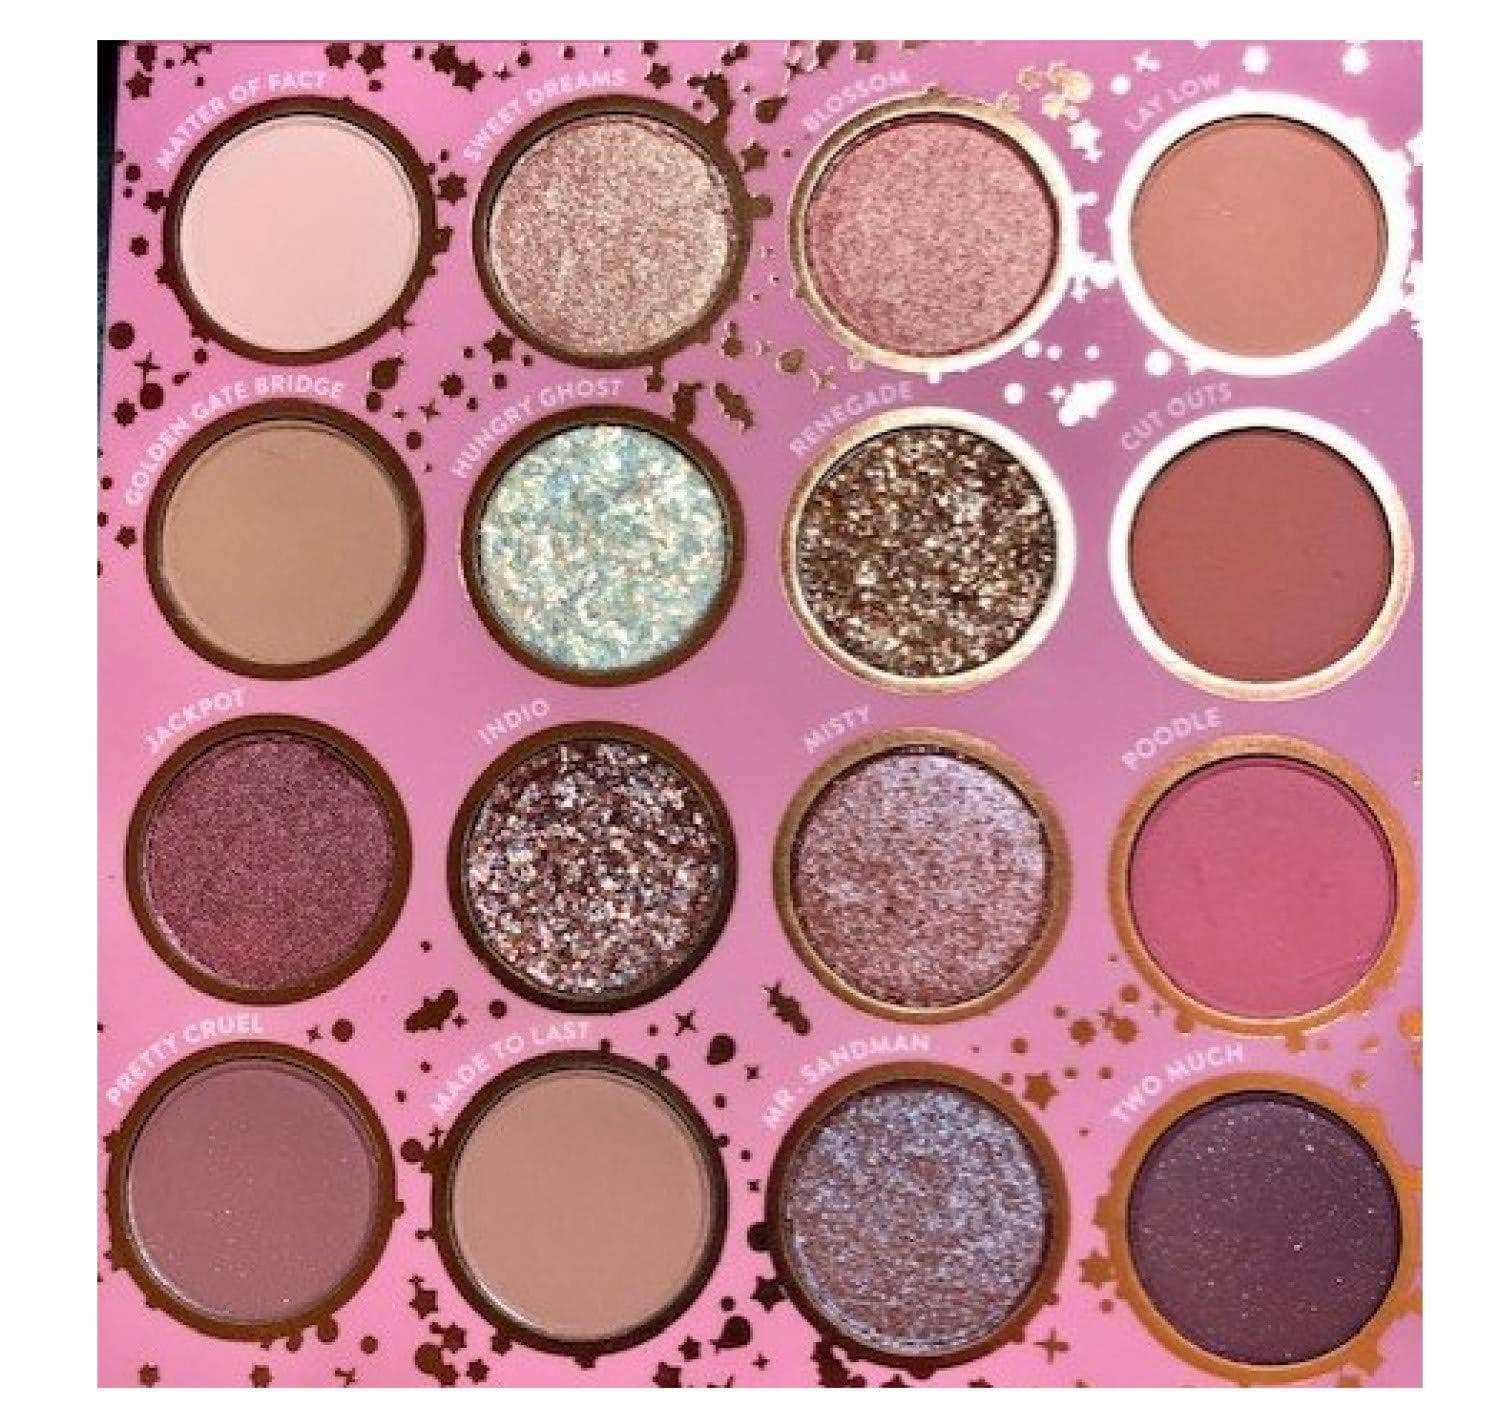 ColourPop's Truly Madly Deeply Palette! With diverse textures and finishes, this eyeshadow palette, priced at $16, offers glittery, matte, and metallic shades in a mess-free, pressed formula. Pure eye artistry!